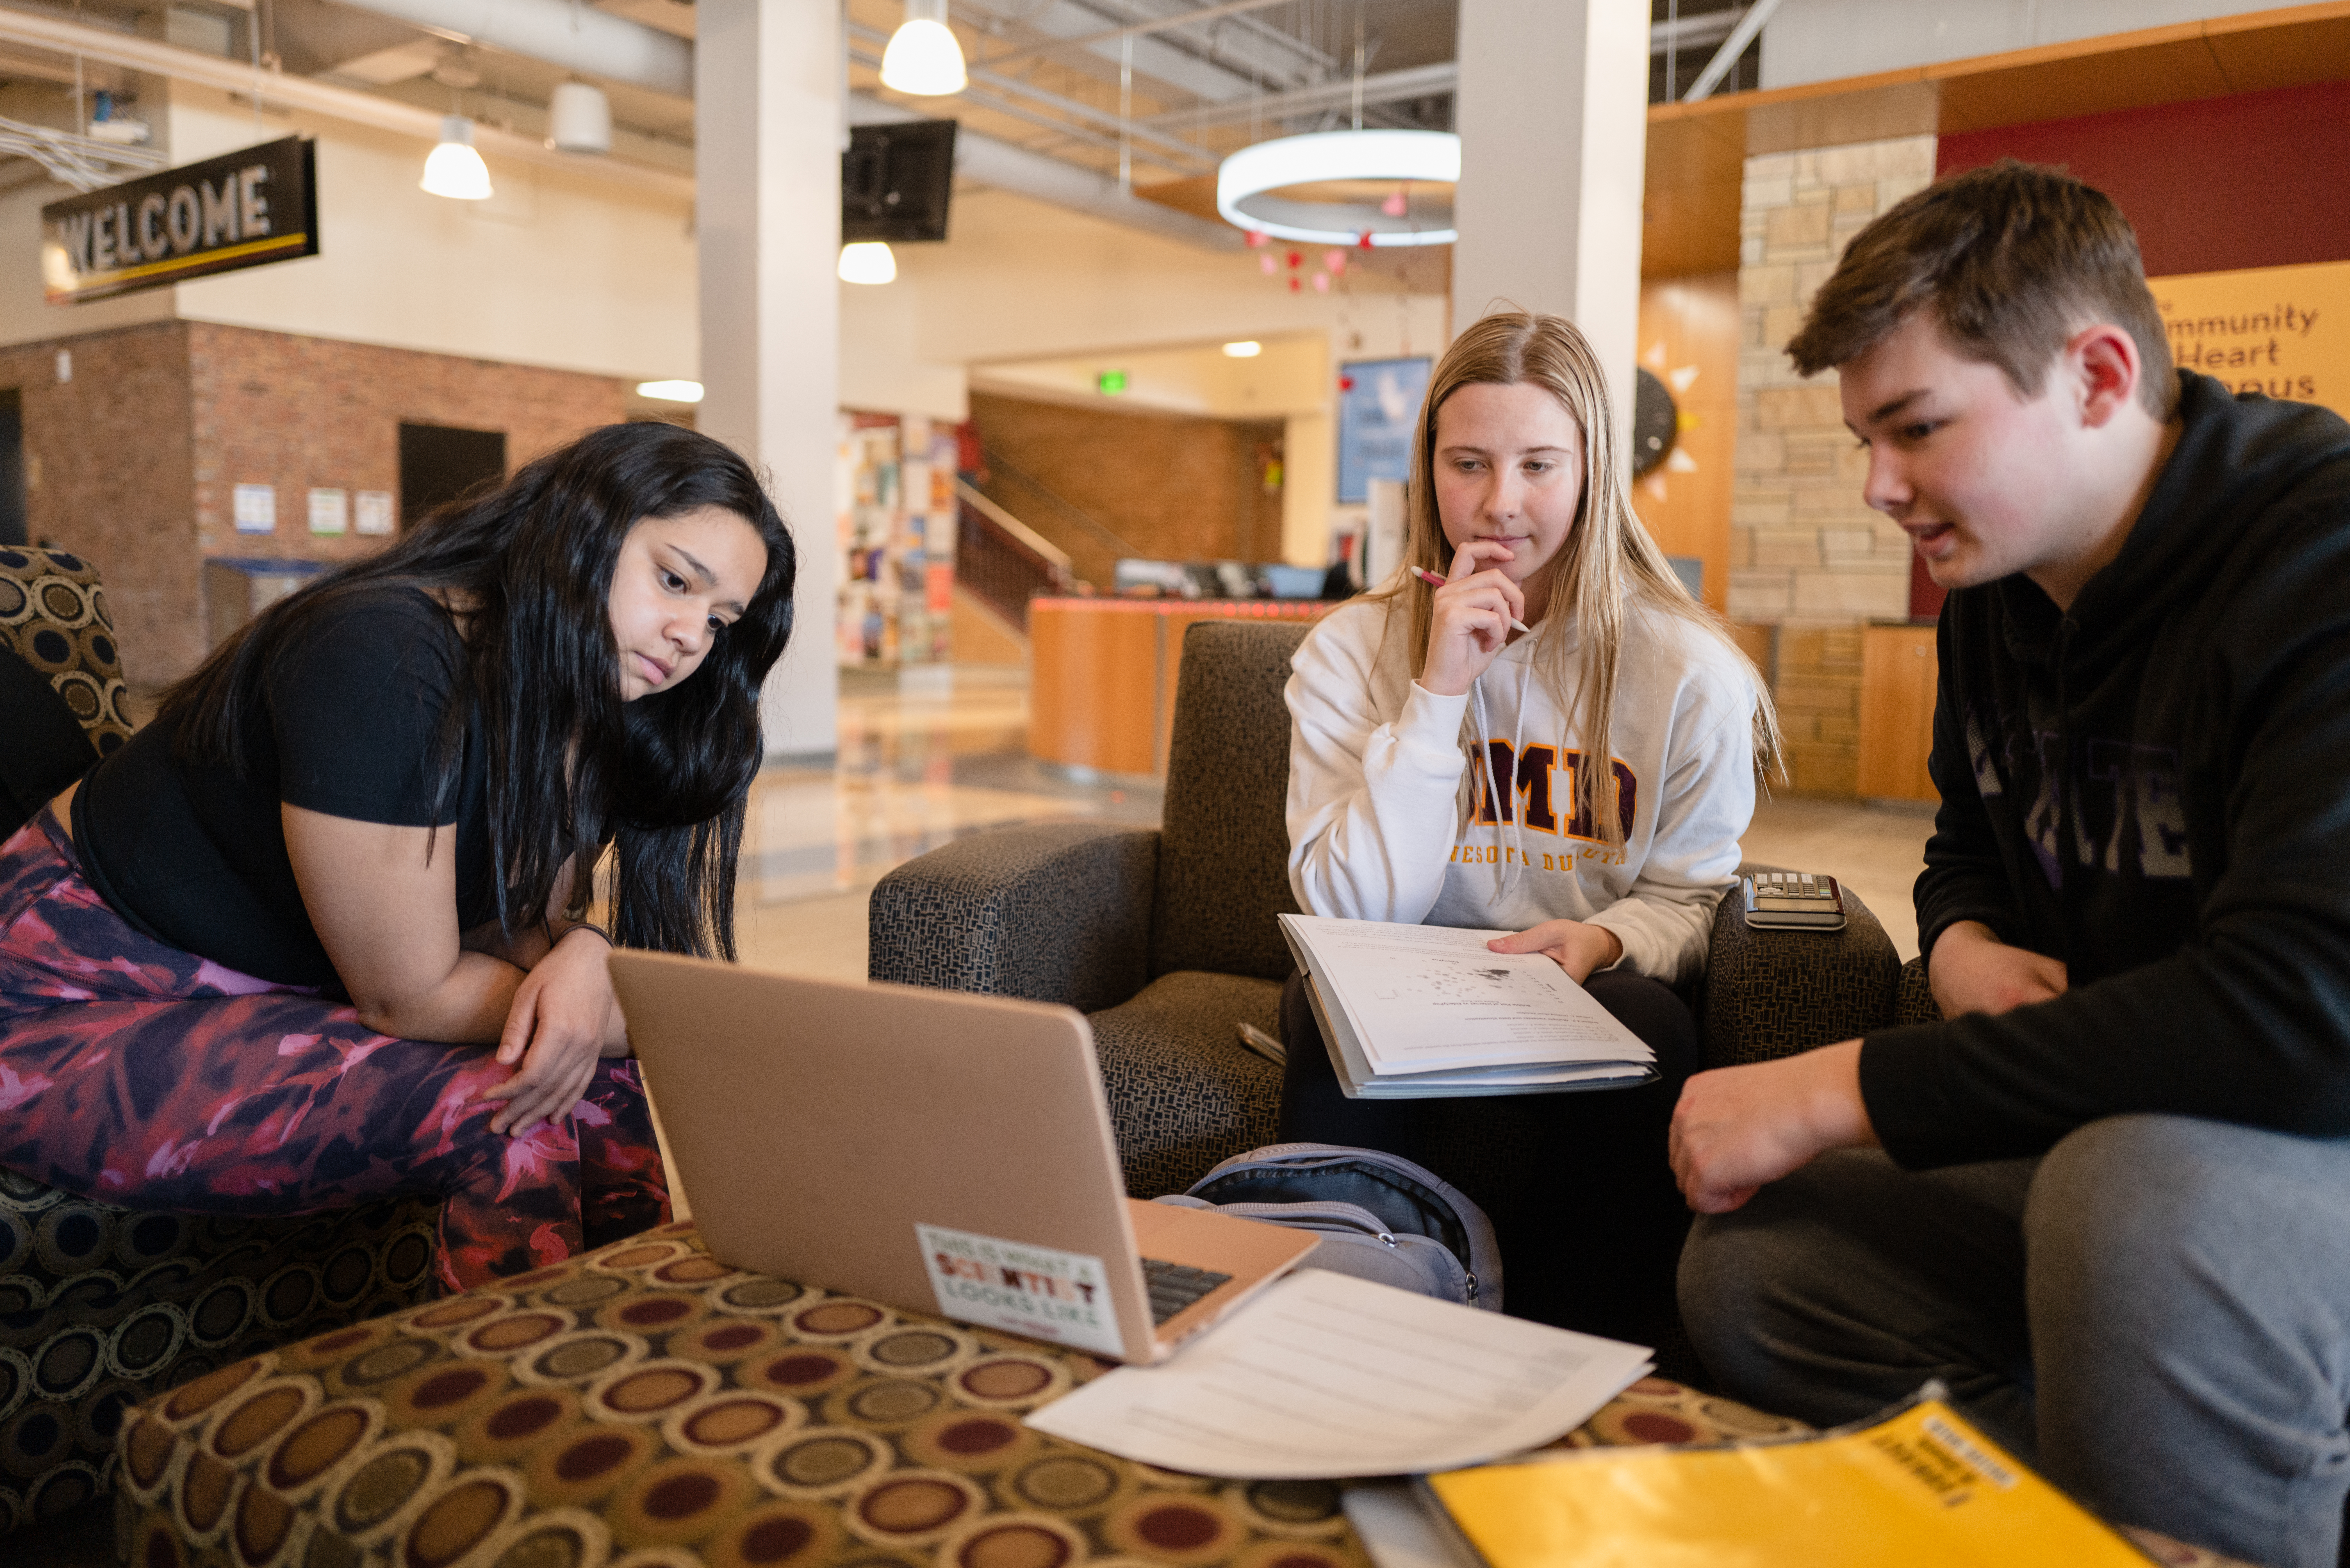 Three students study in the Kirby Student Center with notebooks, calculators, and a laptop